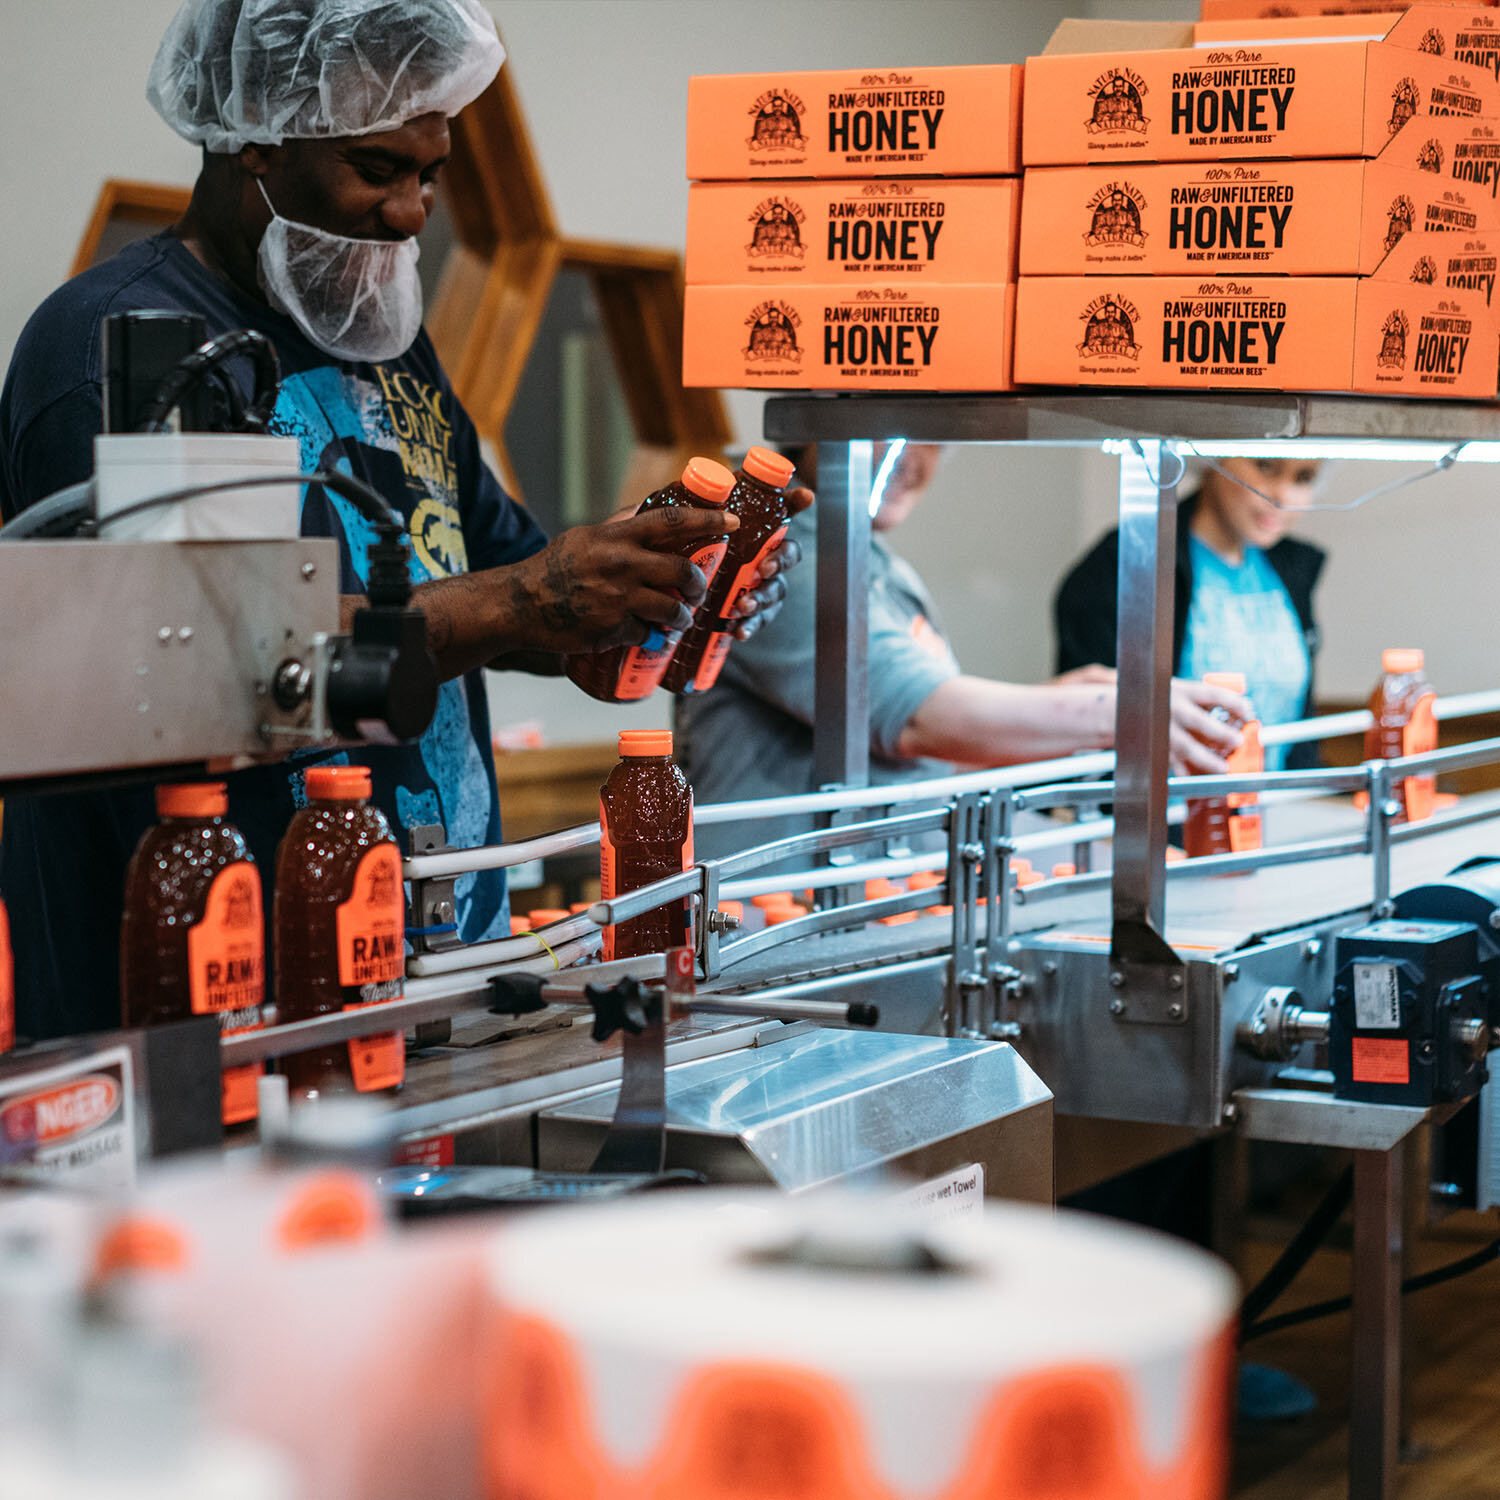 Production employees inspecting and packing Nature Nate's honey bottles on an assembly line in Texas